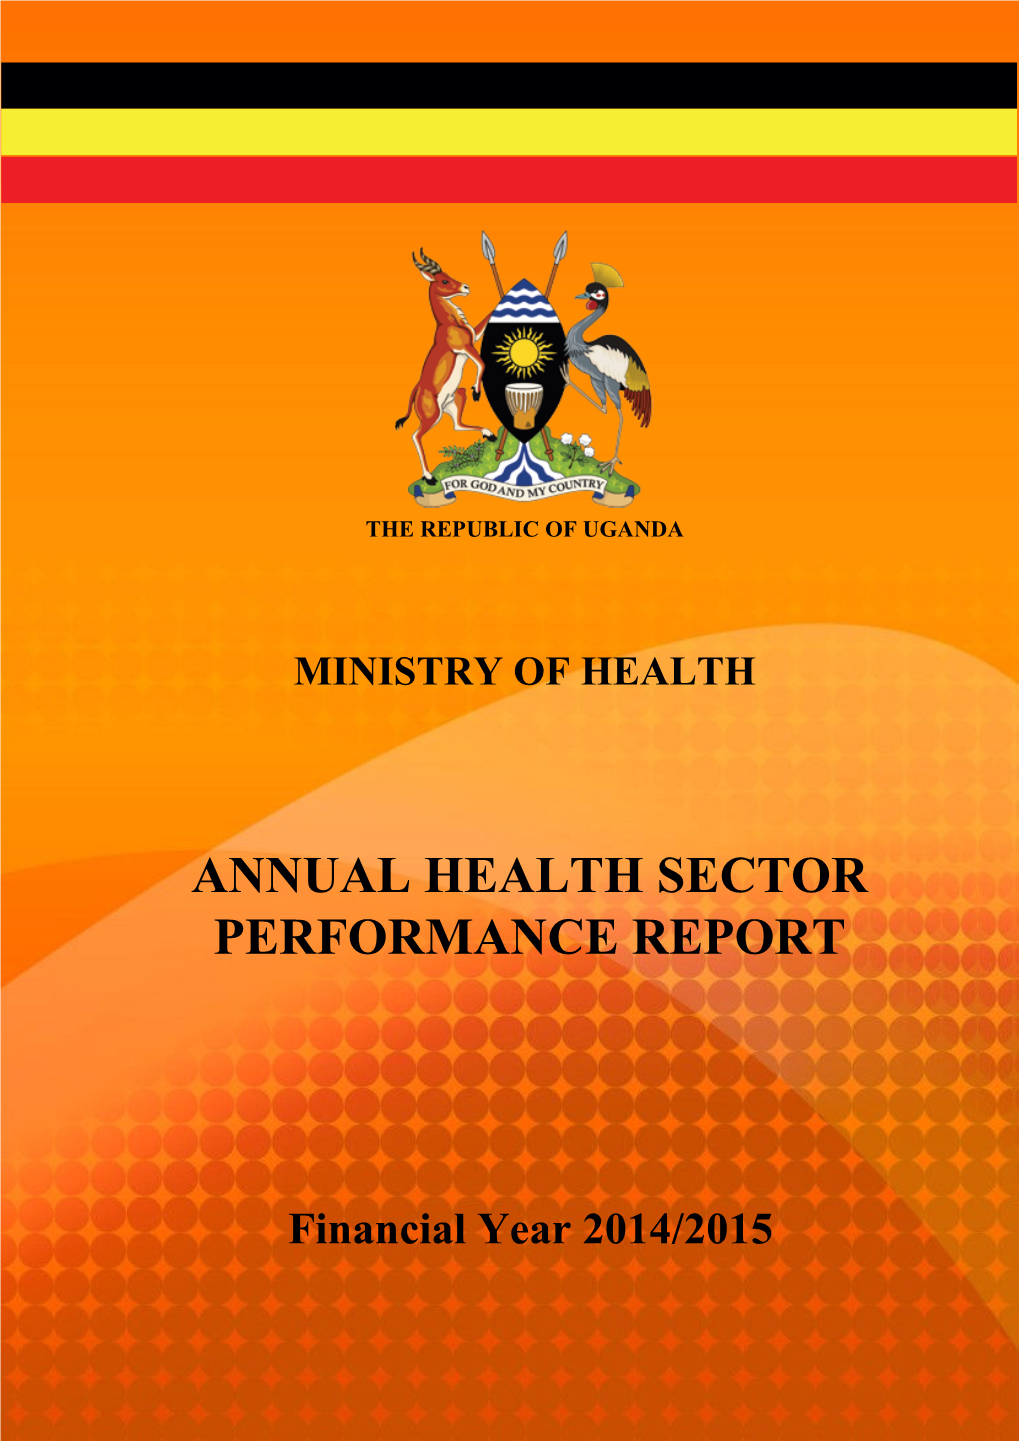 Annual Health Sector Performance Report